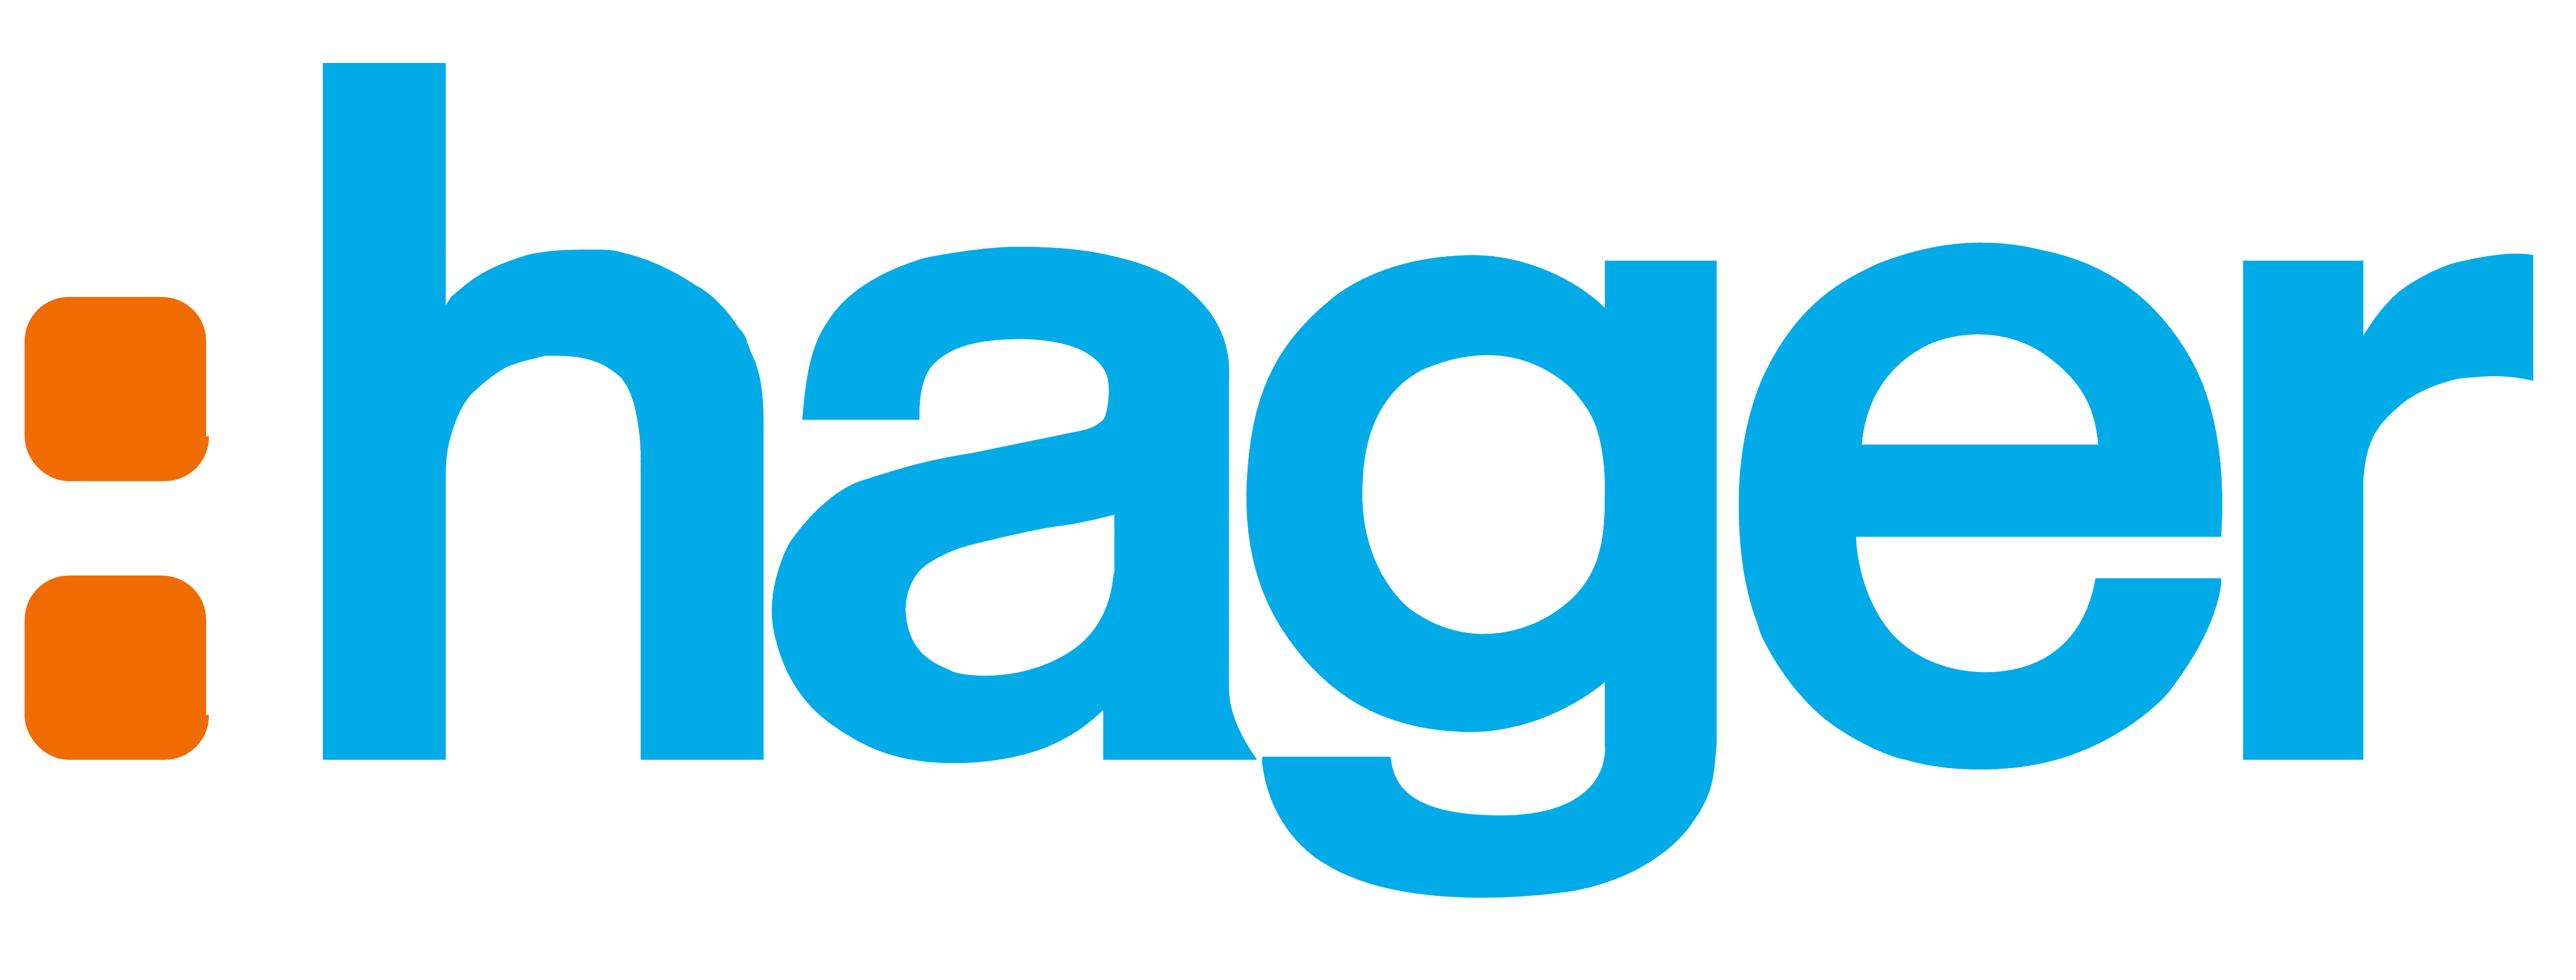 Hager_logo.png